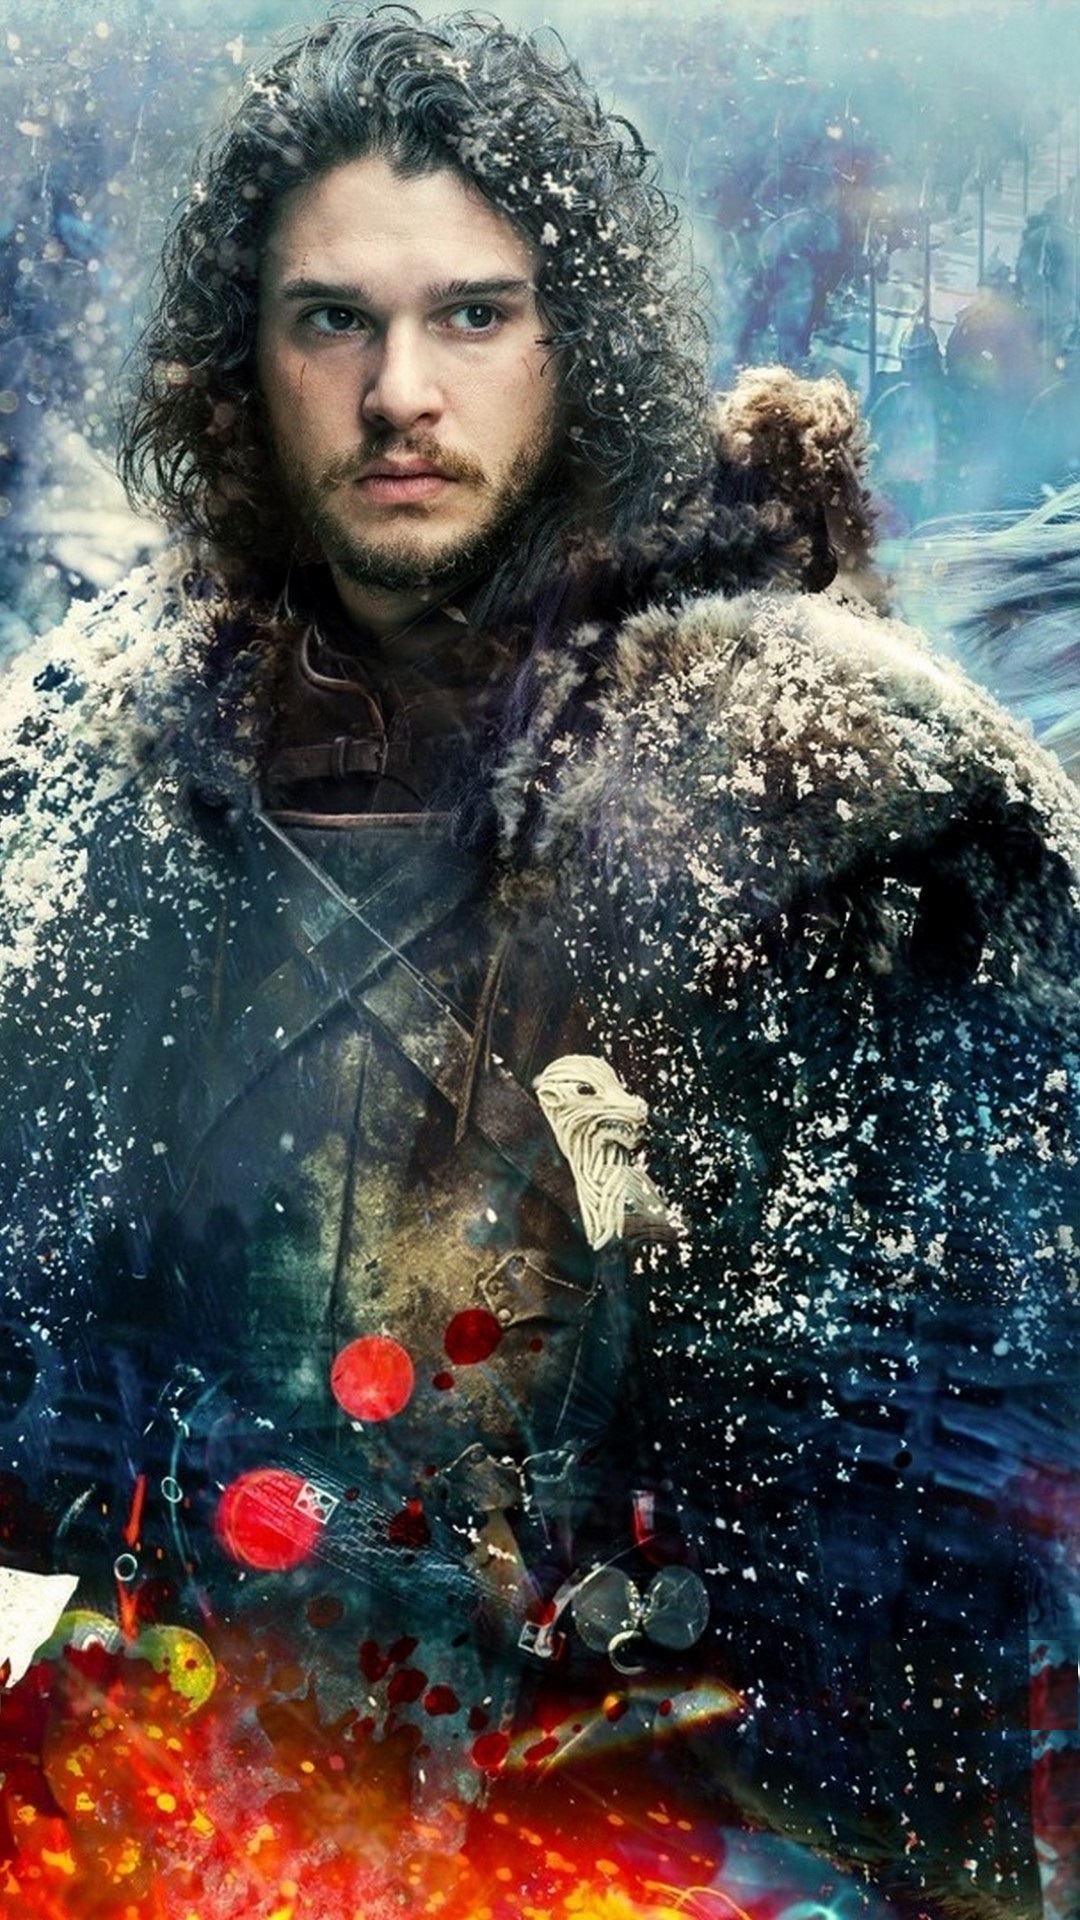 iPhone X Wallpaper Game of Thrones with high-resolution 1080x1920 pixel. You can use this wallpaper for your iPhone 5, 6, 7, 8, X, XS, XR backgrounds, Mobile Screensaver, or iPad Lock Screen